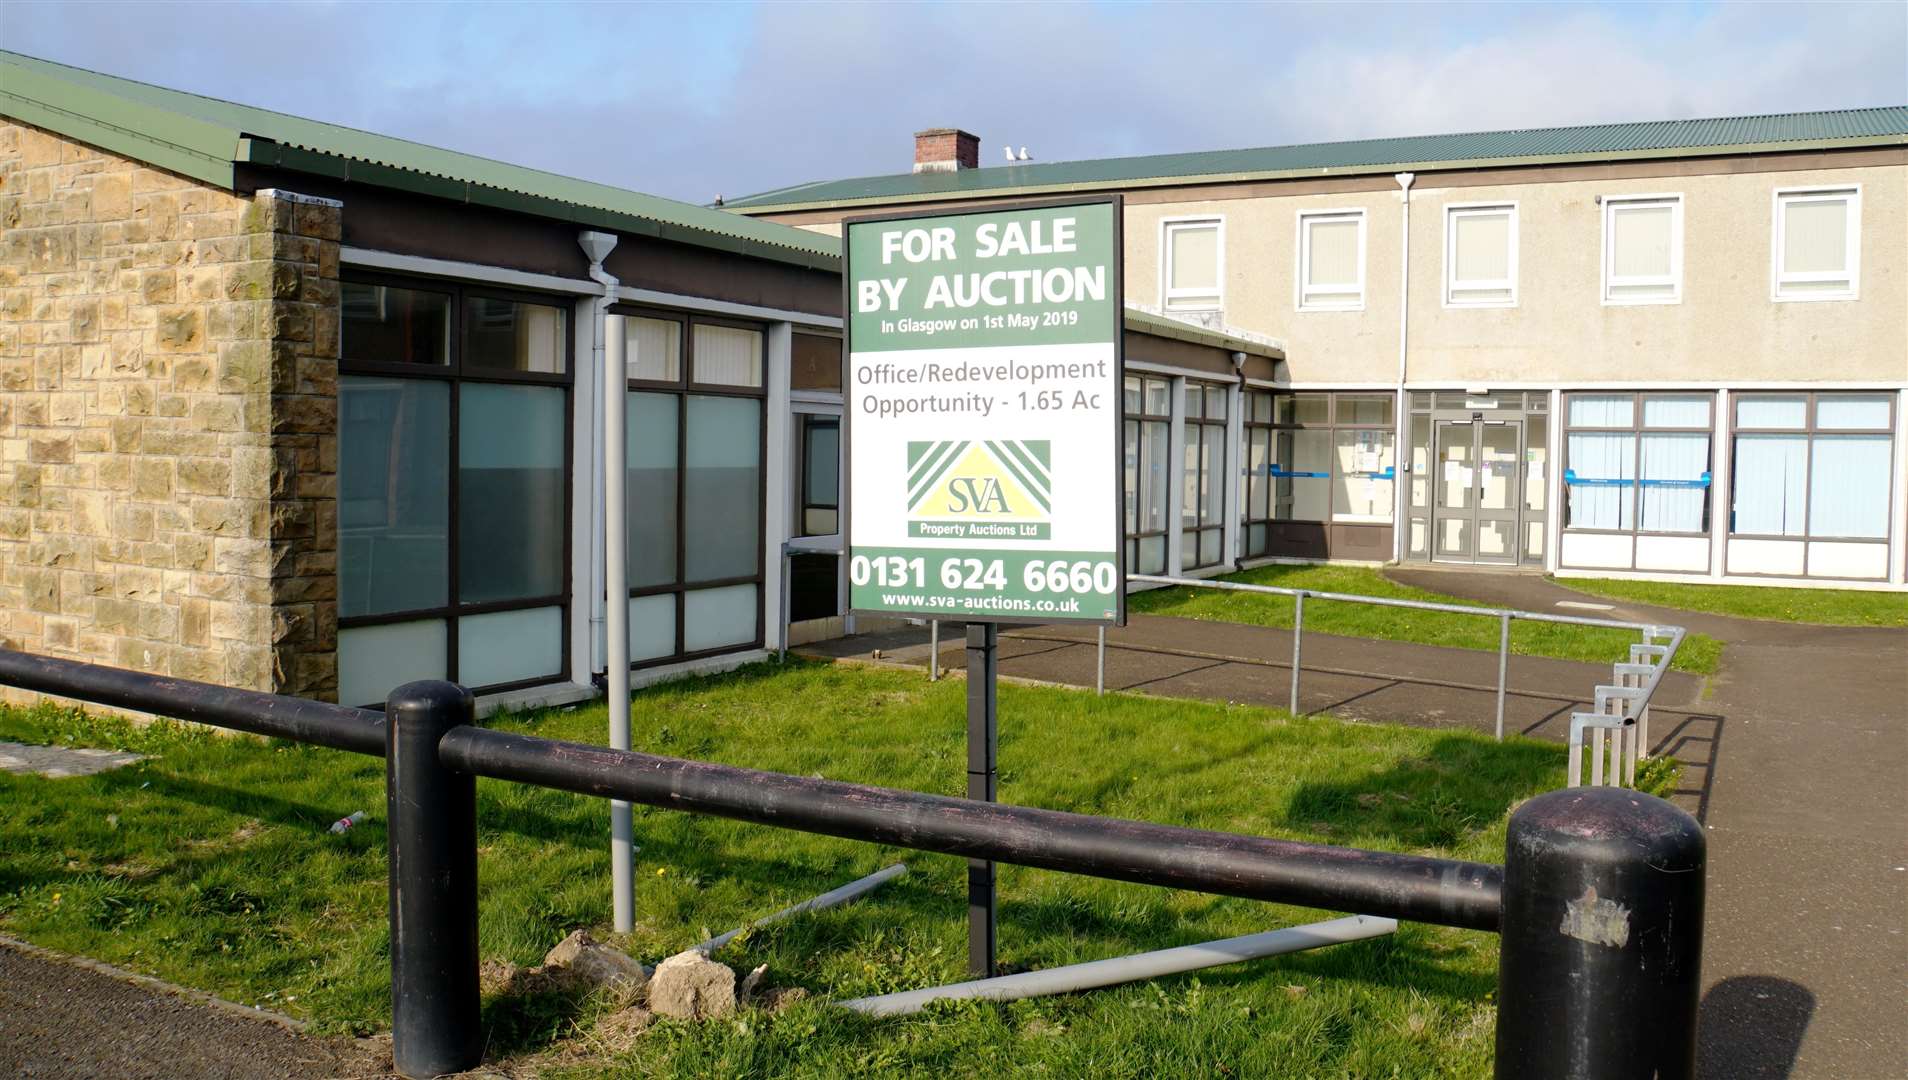 The former government buildings in Wick sold at auction last Wednesday.